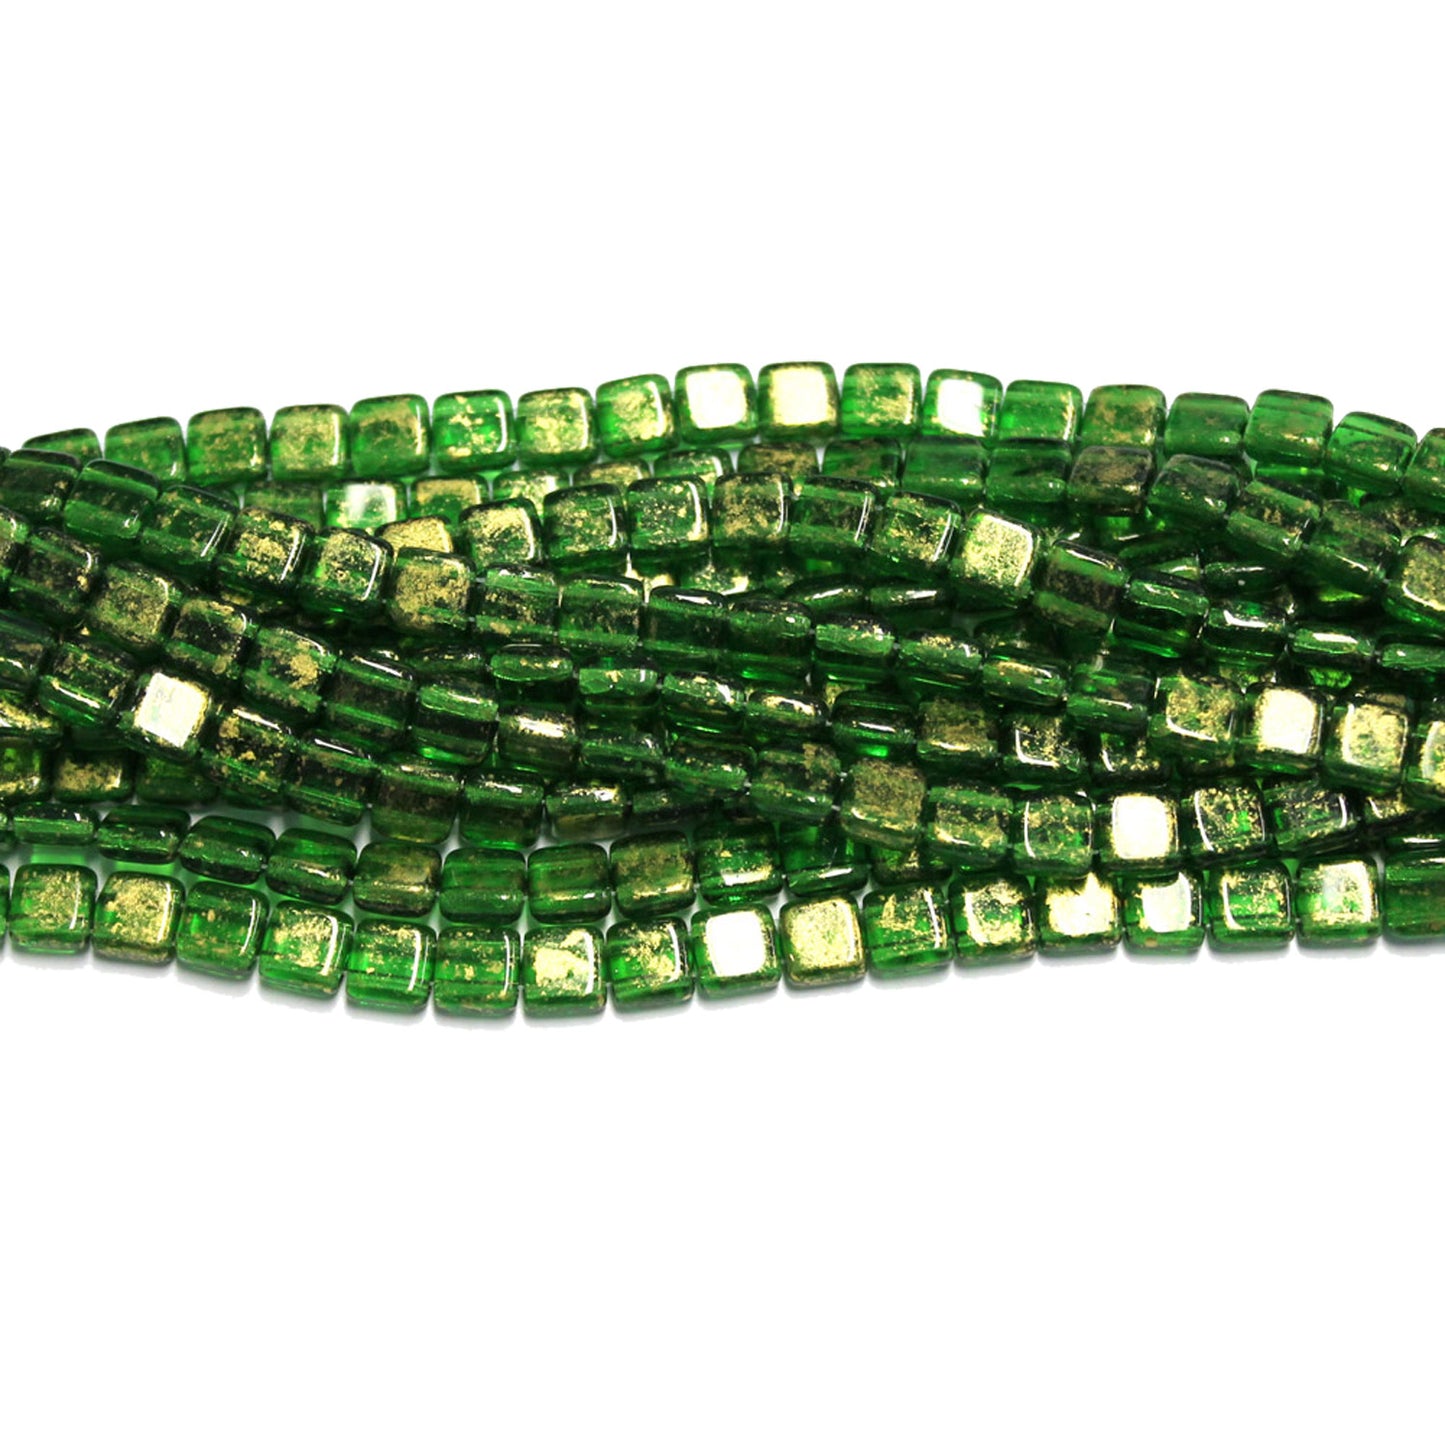 6mm Gold Marbled - Green Emerald / 2 Hole CzechMates Tile Beads / 50 Bead Strand